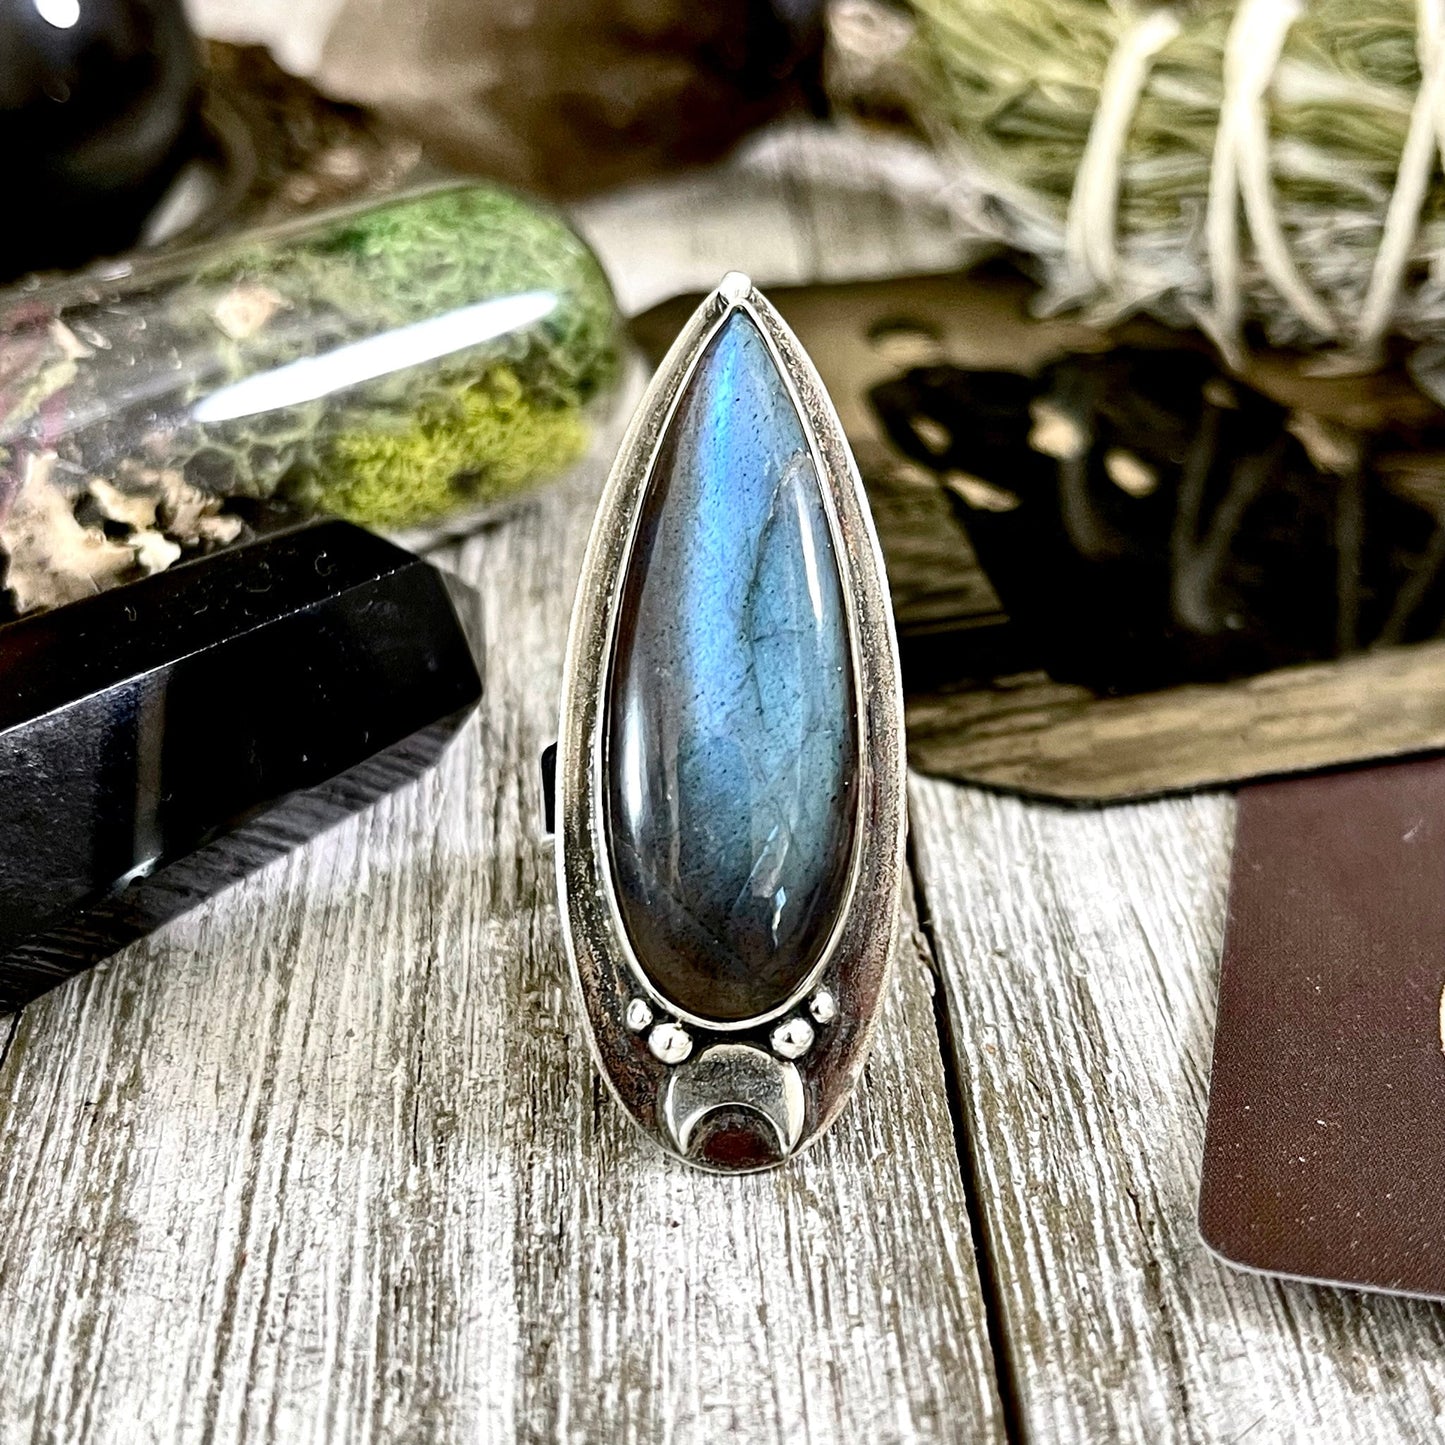 Big Crystal Ring, Blue Crystal Ring, Blue stone Ring, Bohemian Jewelry, Bohemian Ring, boho jewelry, Etsy ID: 1088284026, Foxlark Alchemy, FOXLARK- RINGS, Goth Jewelry, Jewelry, Labradorite Jewelry, Moon Jewelry, Rings, Rock and Roll Ring, Statement Rings